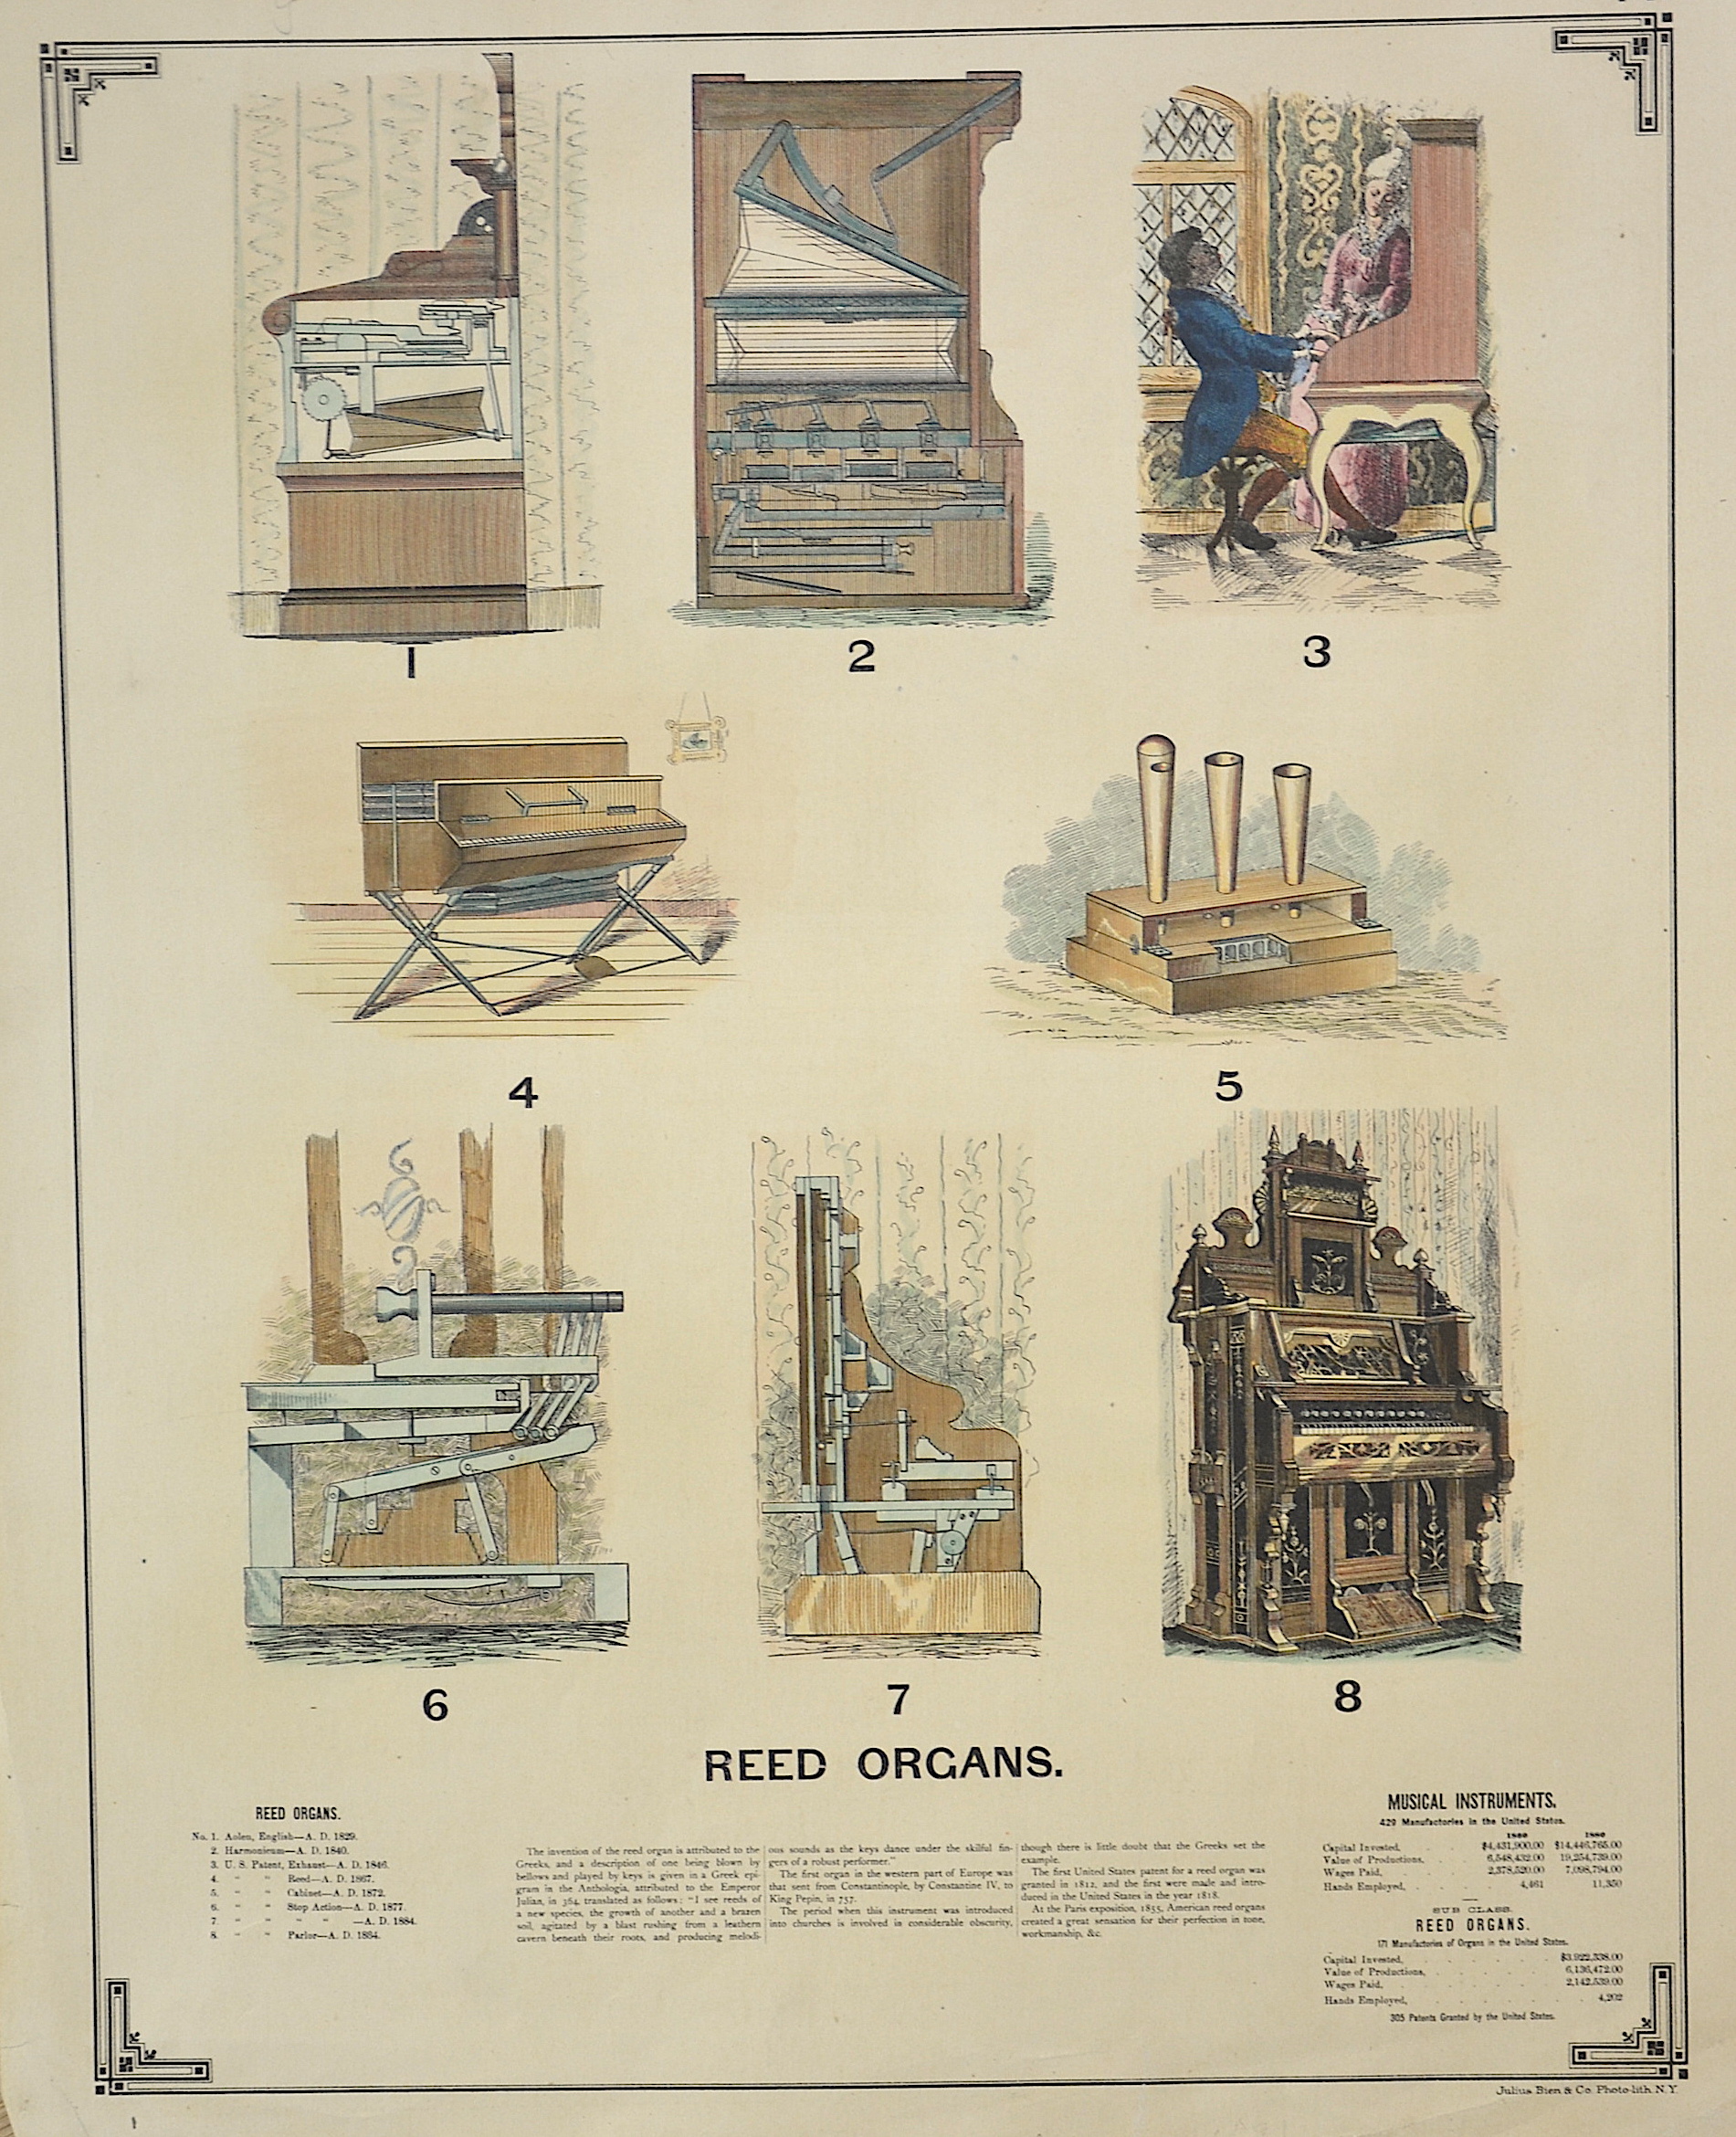 Bien/Julius & Co. Photo-lith NY  Reed Orgnas. 141 / Oil Presses and mats.